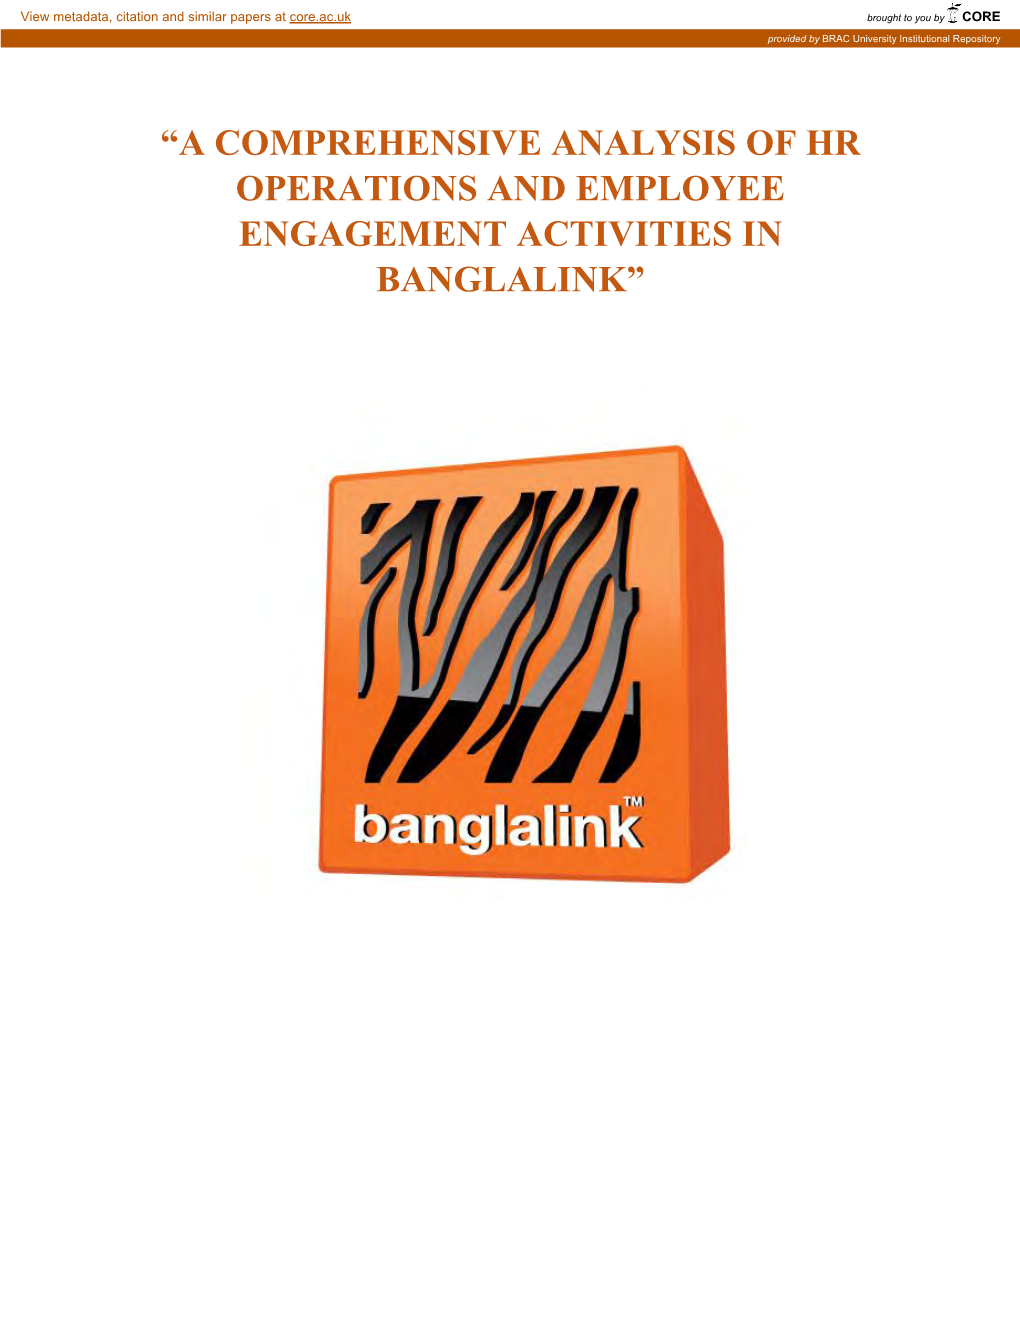 A Comprehensive Analysis of Hr Operations and Employee Engagement Activities in Banglalink”